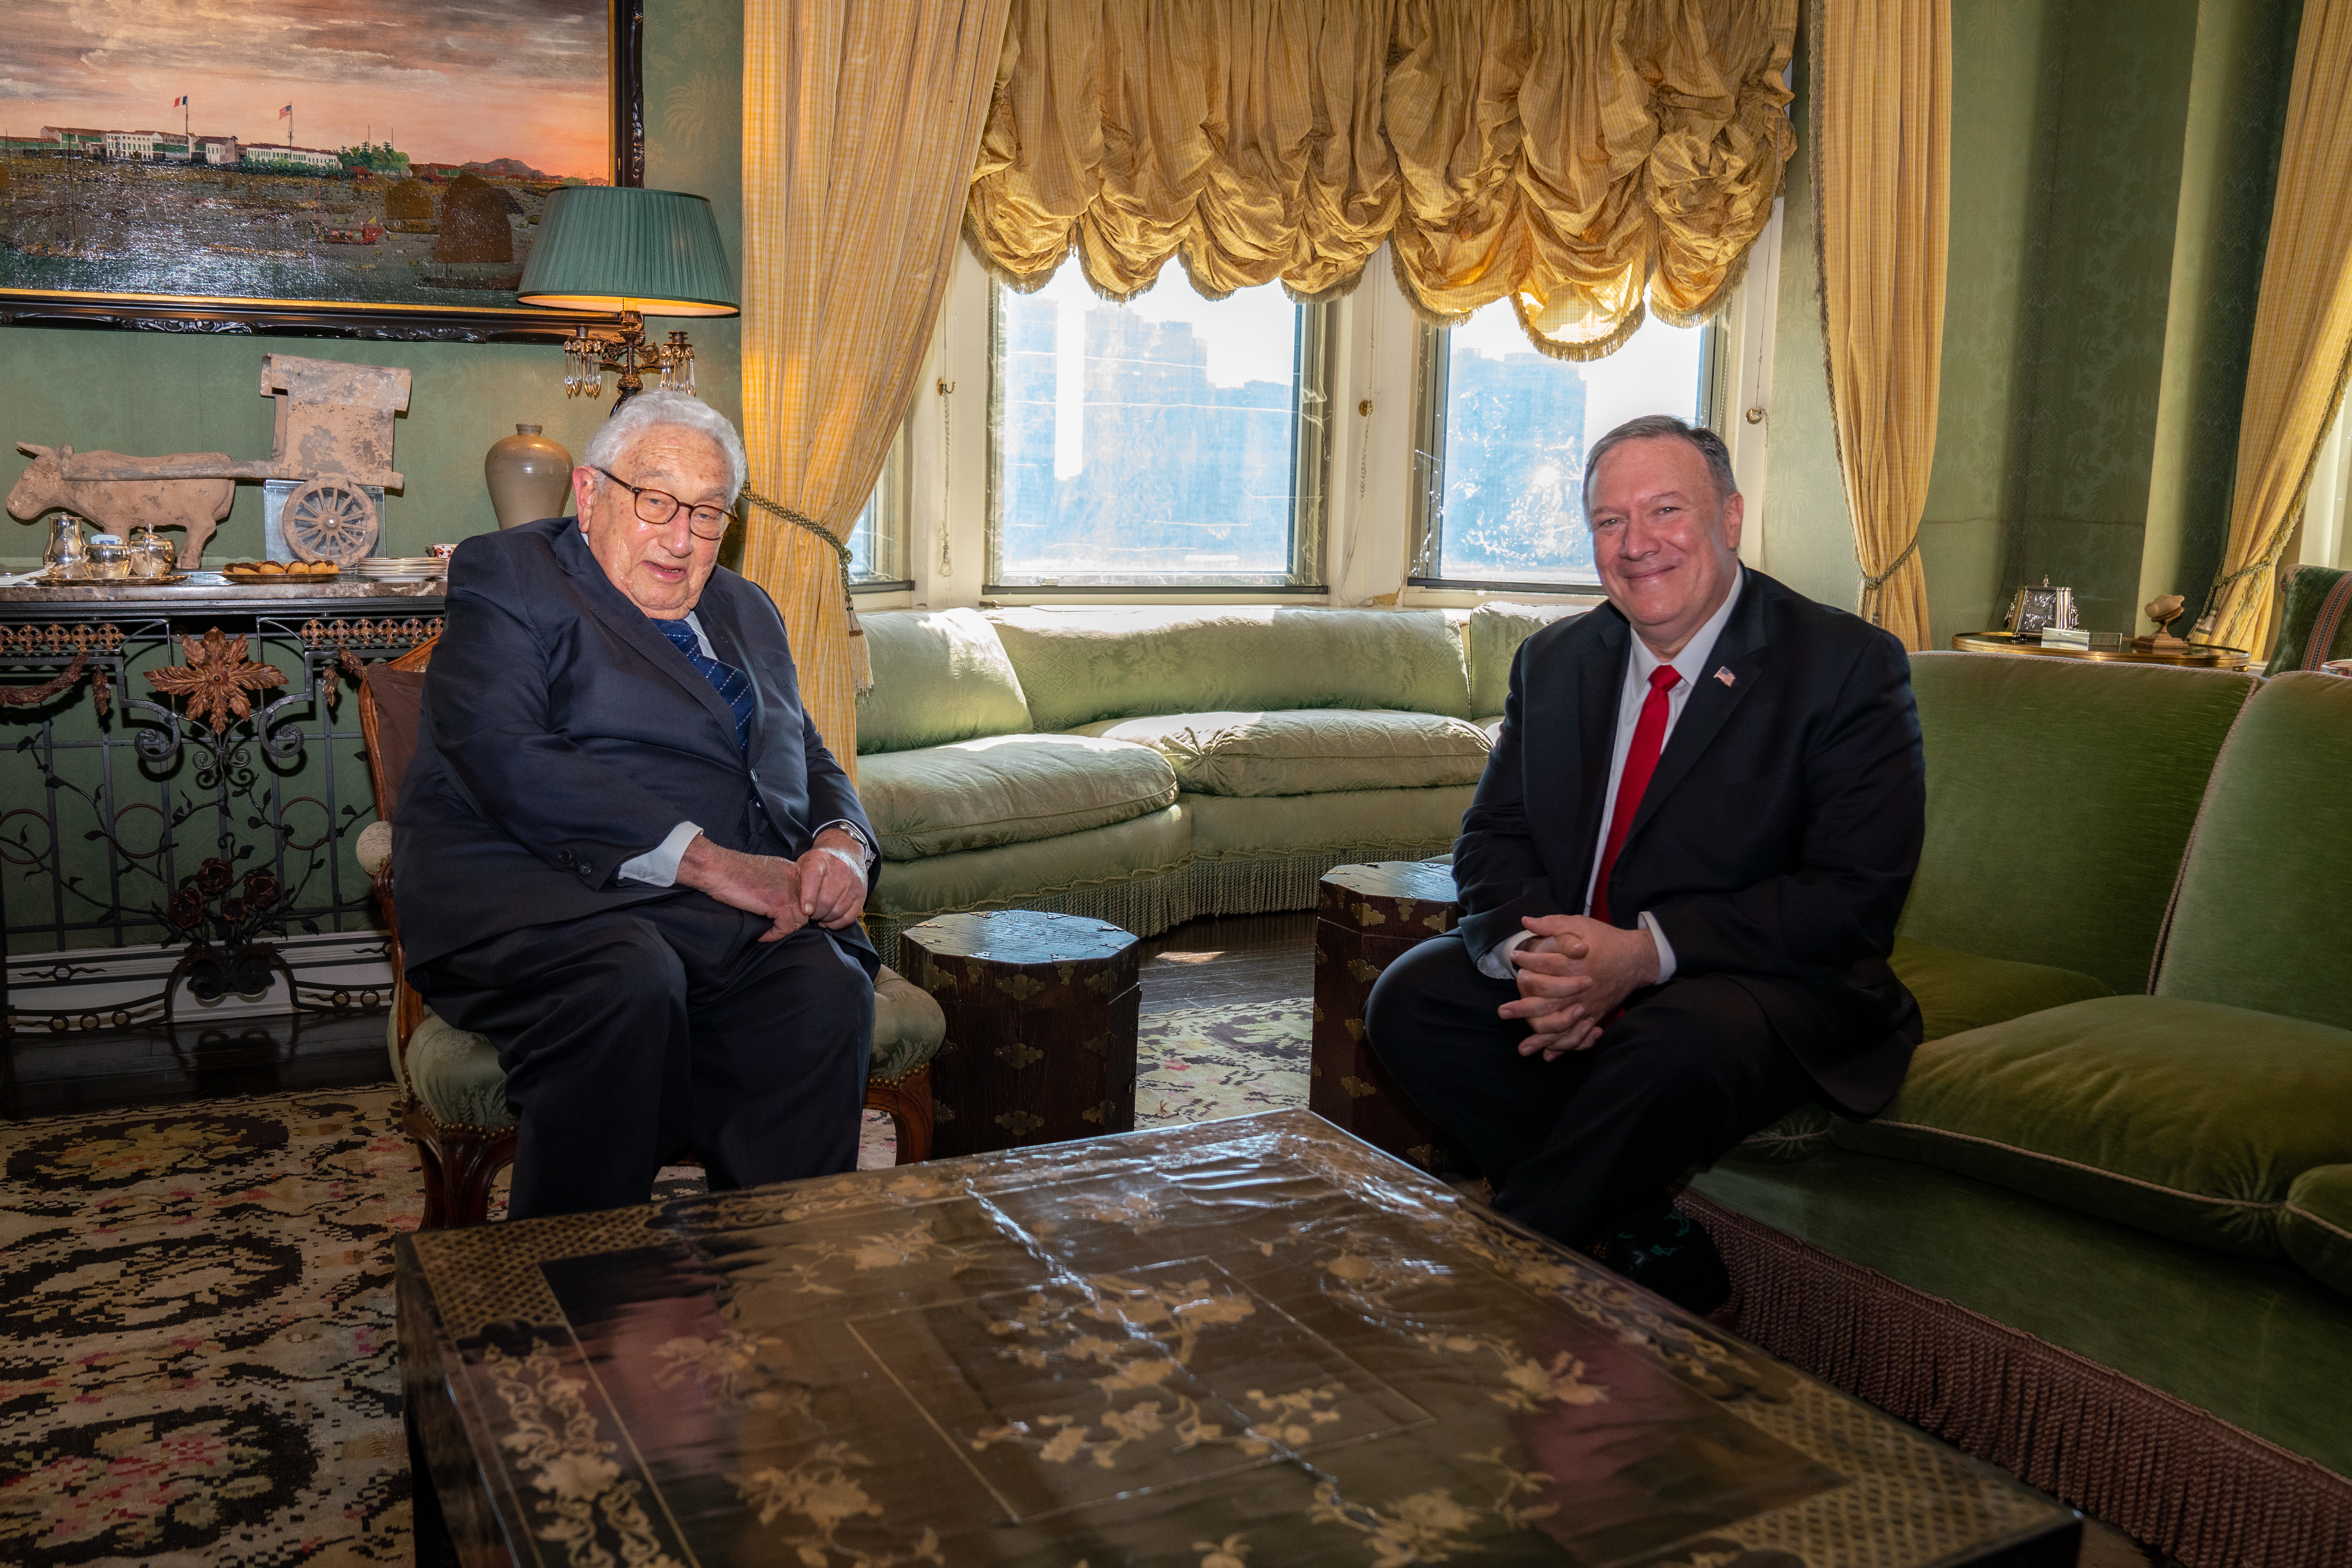 epa07875848 A handout photo made available by the US Department of State (DOS) shows US Secretary of State Mike Pompeo (R) meeting with former Secretary of State Dr. Henry Kissinger in New York City, New York, USA, 27 September 2019 (issued 28 September 2019).  EPA/RON PRZYSUCHA/US DEPARTMENT OF STATE HANDOUT  HANDOUT EDITORIAL USE ONLY/NO SALES